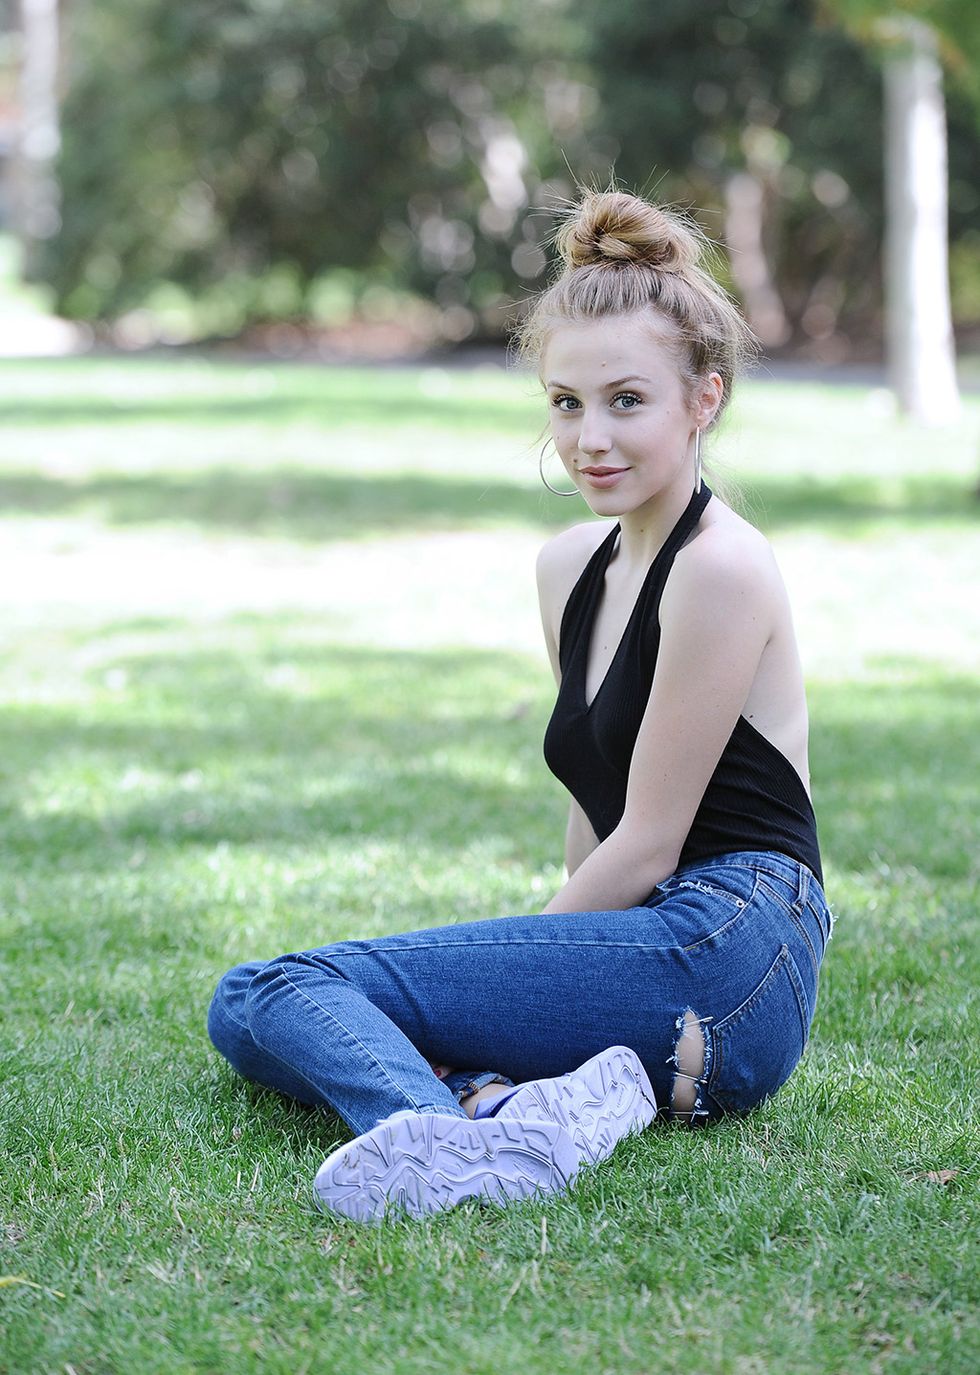 People in nature, Sitting, Photograph, Grass, Beauty, Blond, Photography, Jeans, Photo shoot, Leg, 